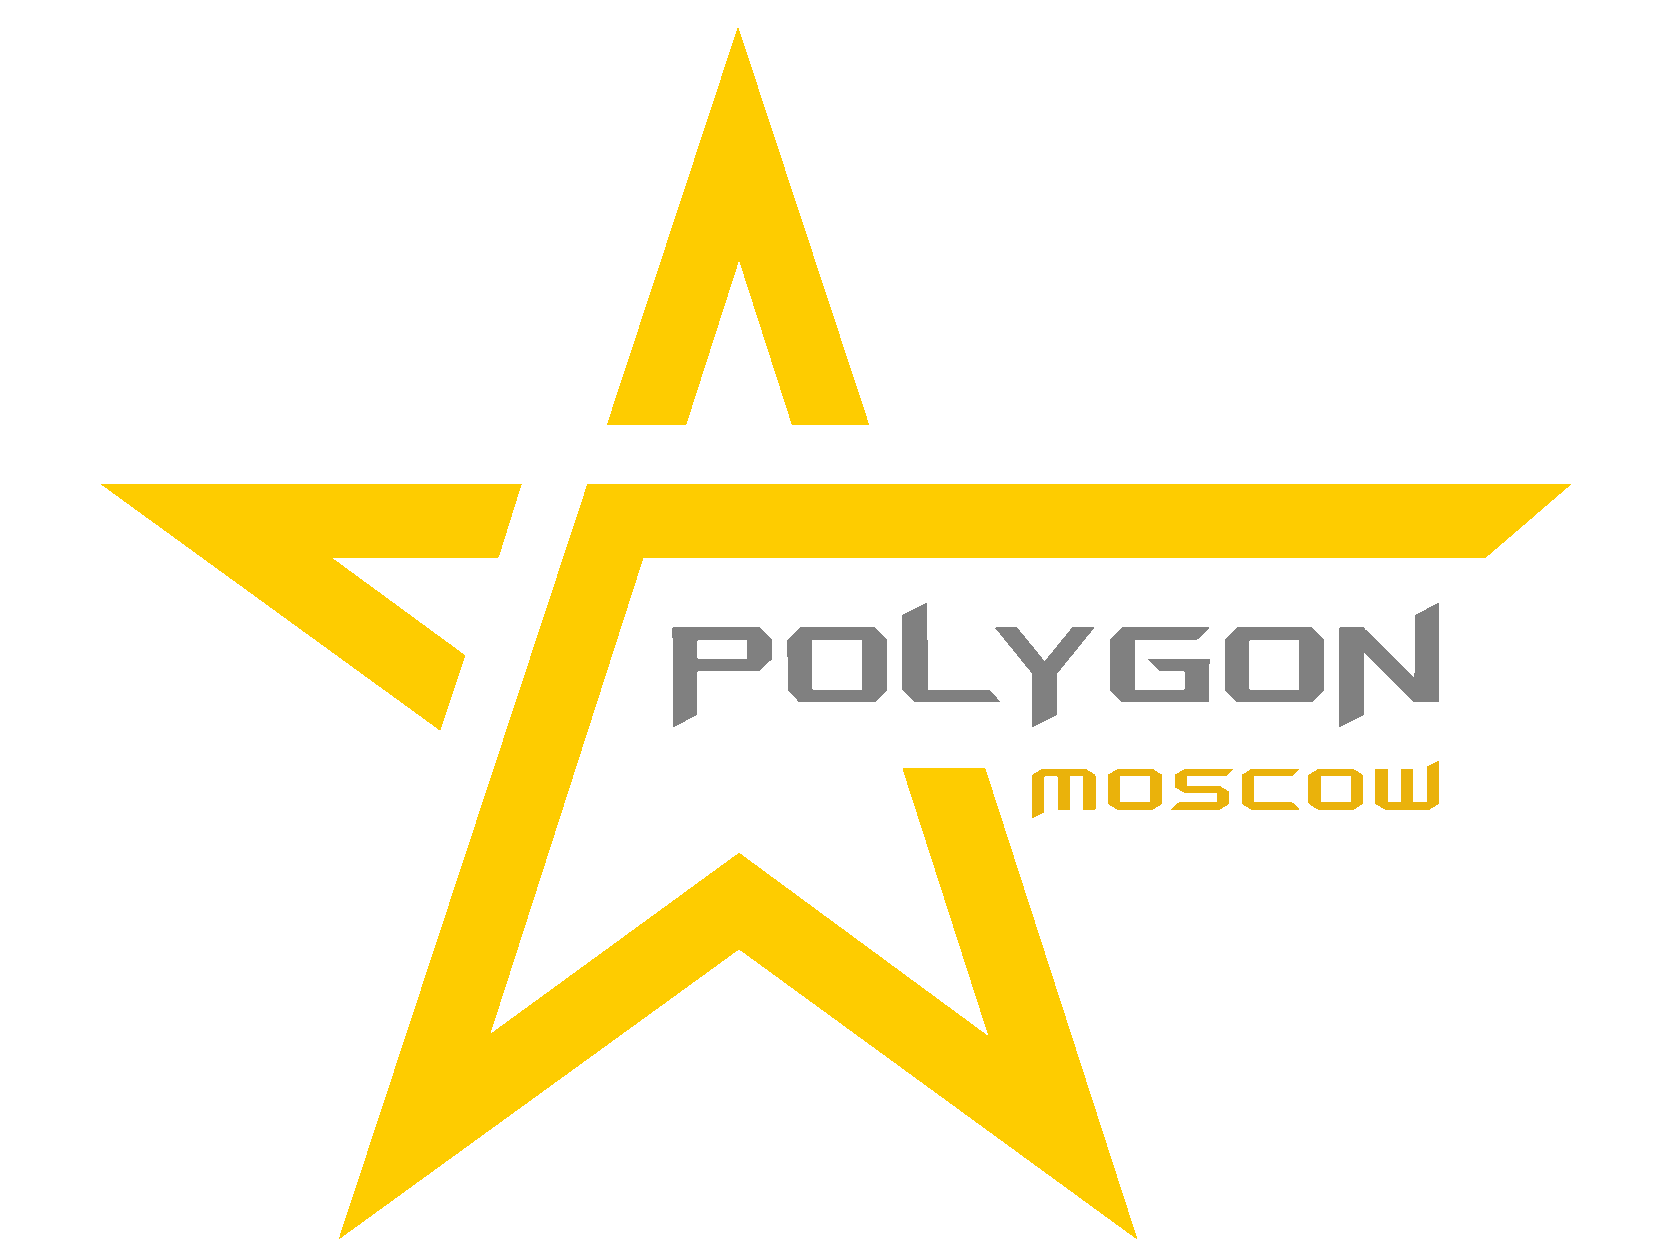 Polygon Moscow